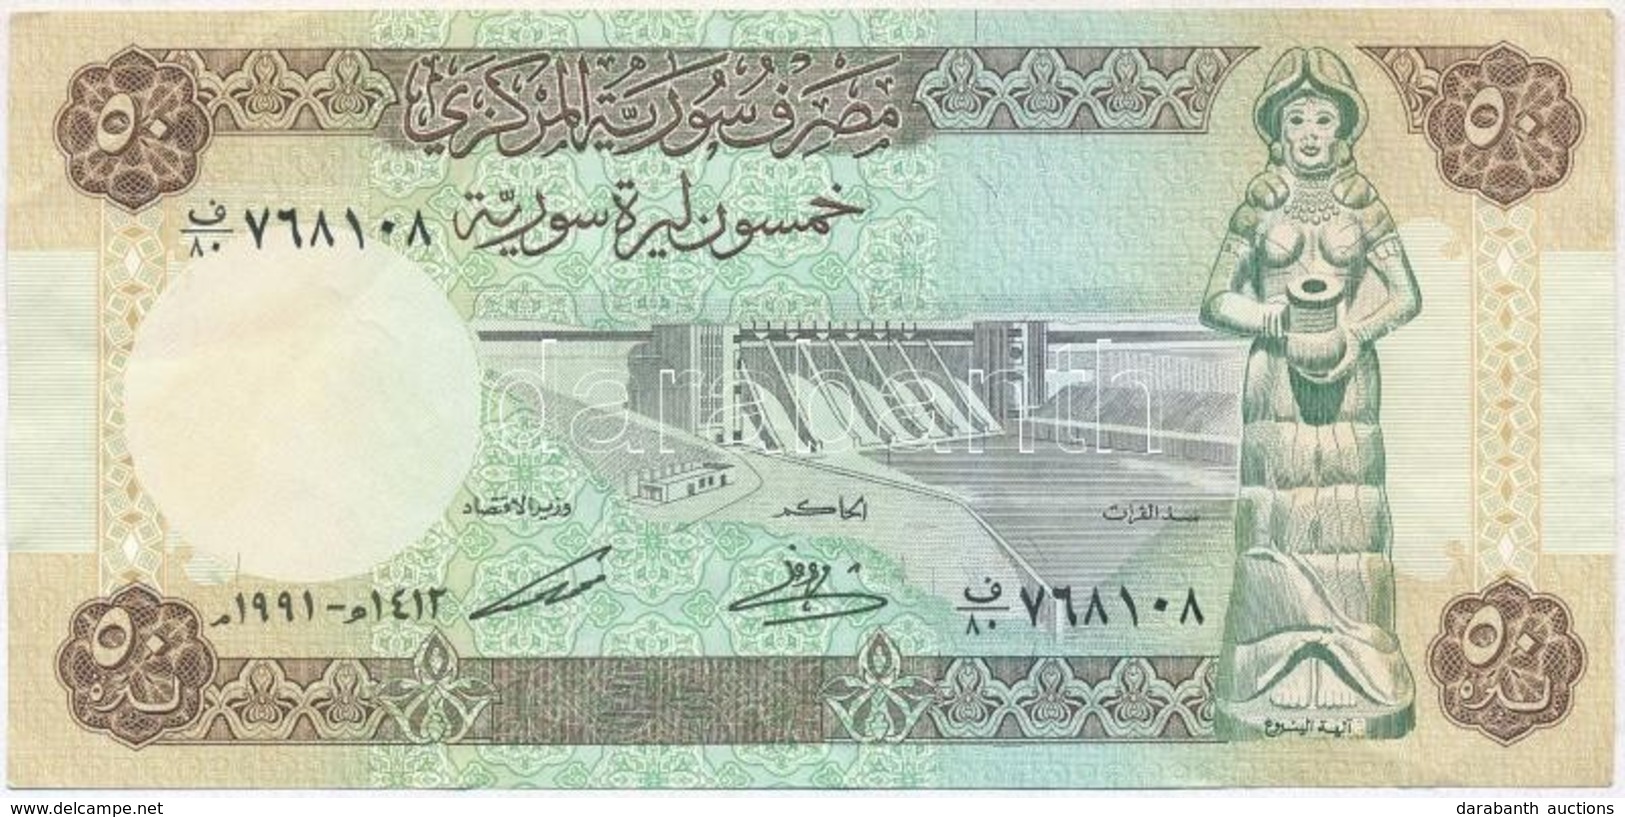 Szíria 1991. 50Ł T:III
Syria 1991. 50 Pounds C:F - Unclassified